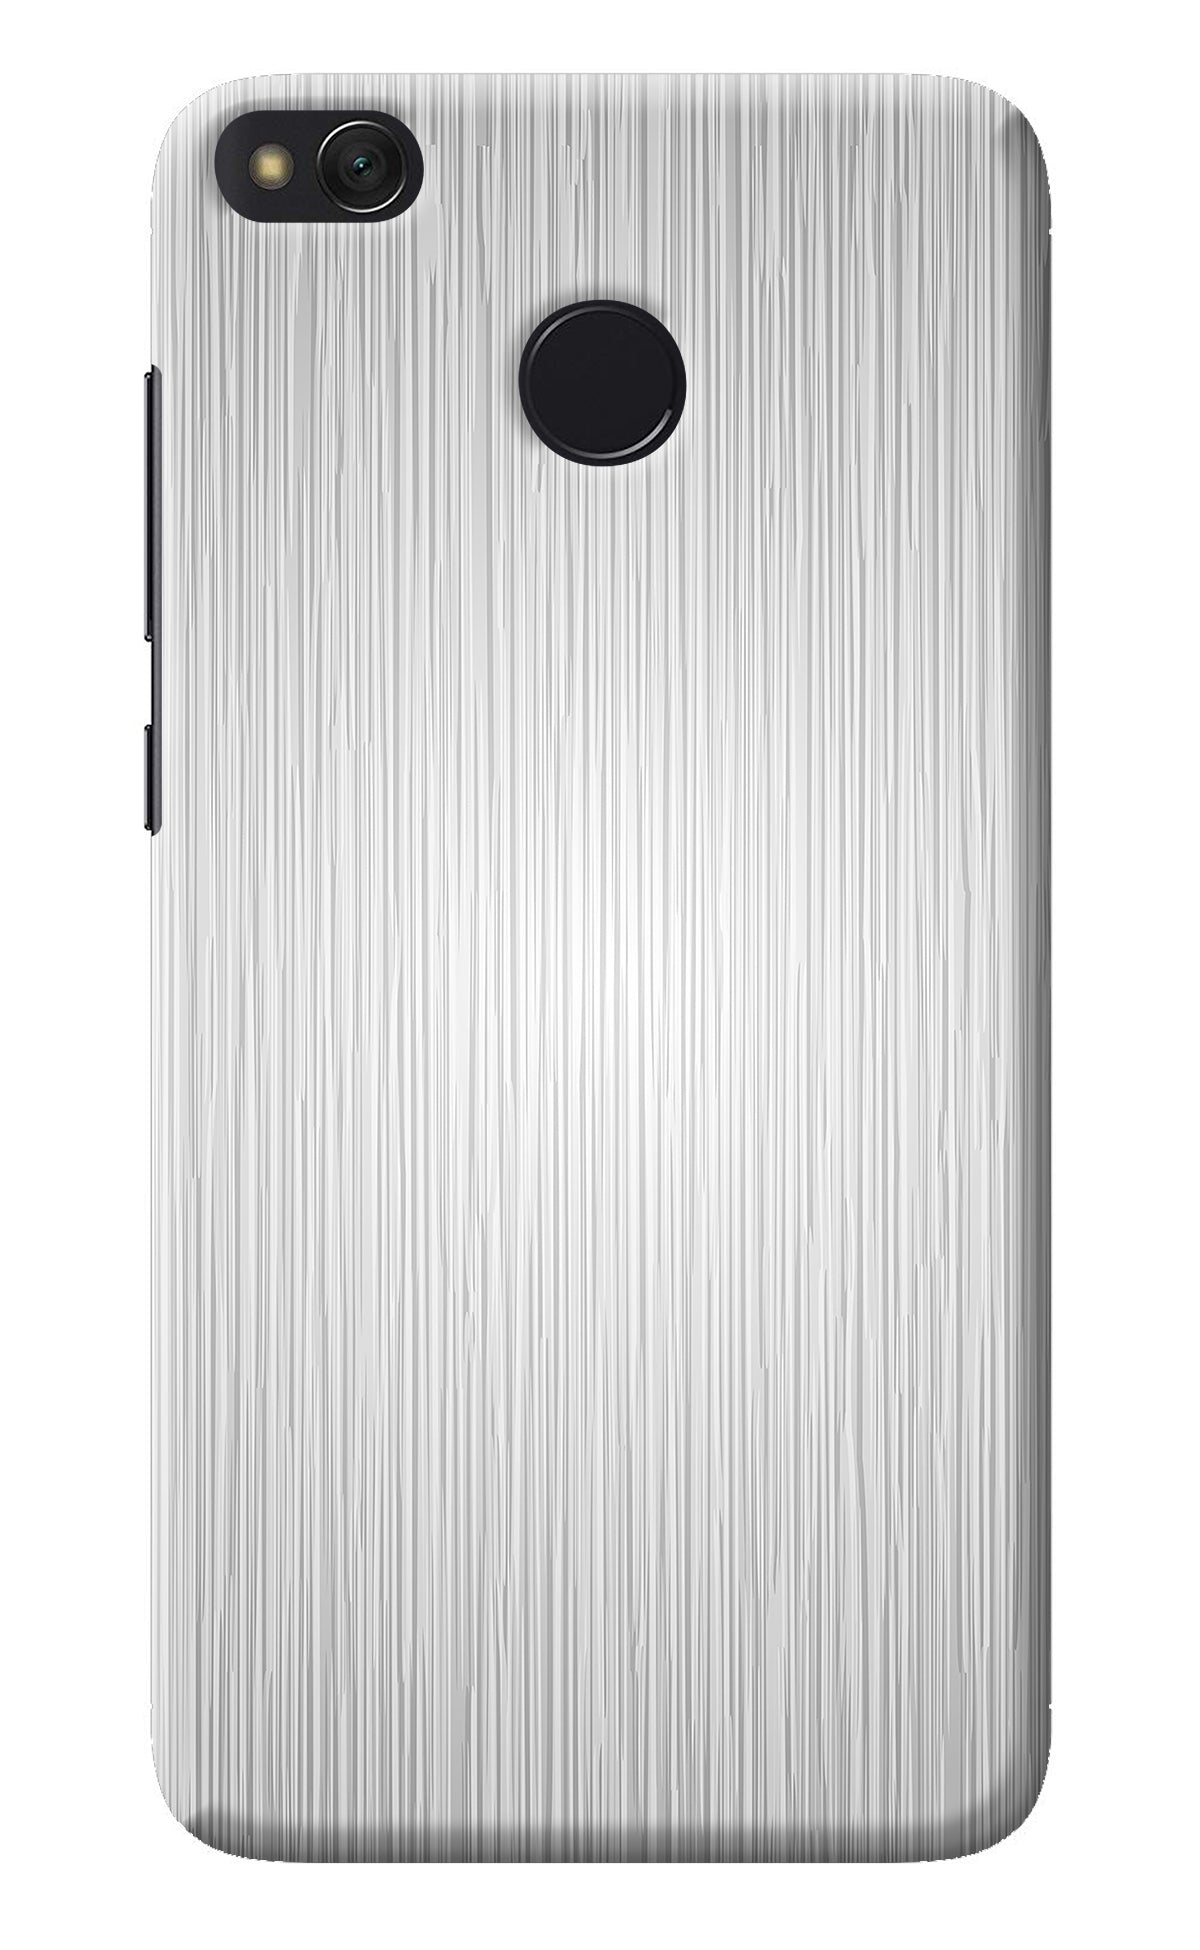 Wooden Grey Texture Redmi 4 Back Cover